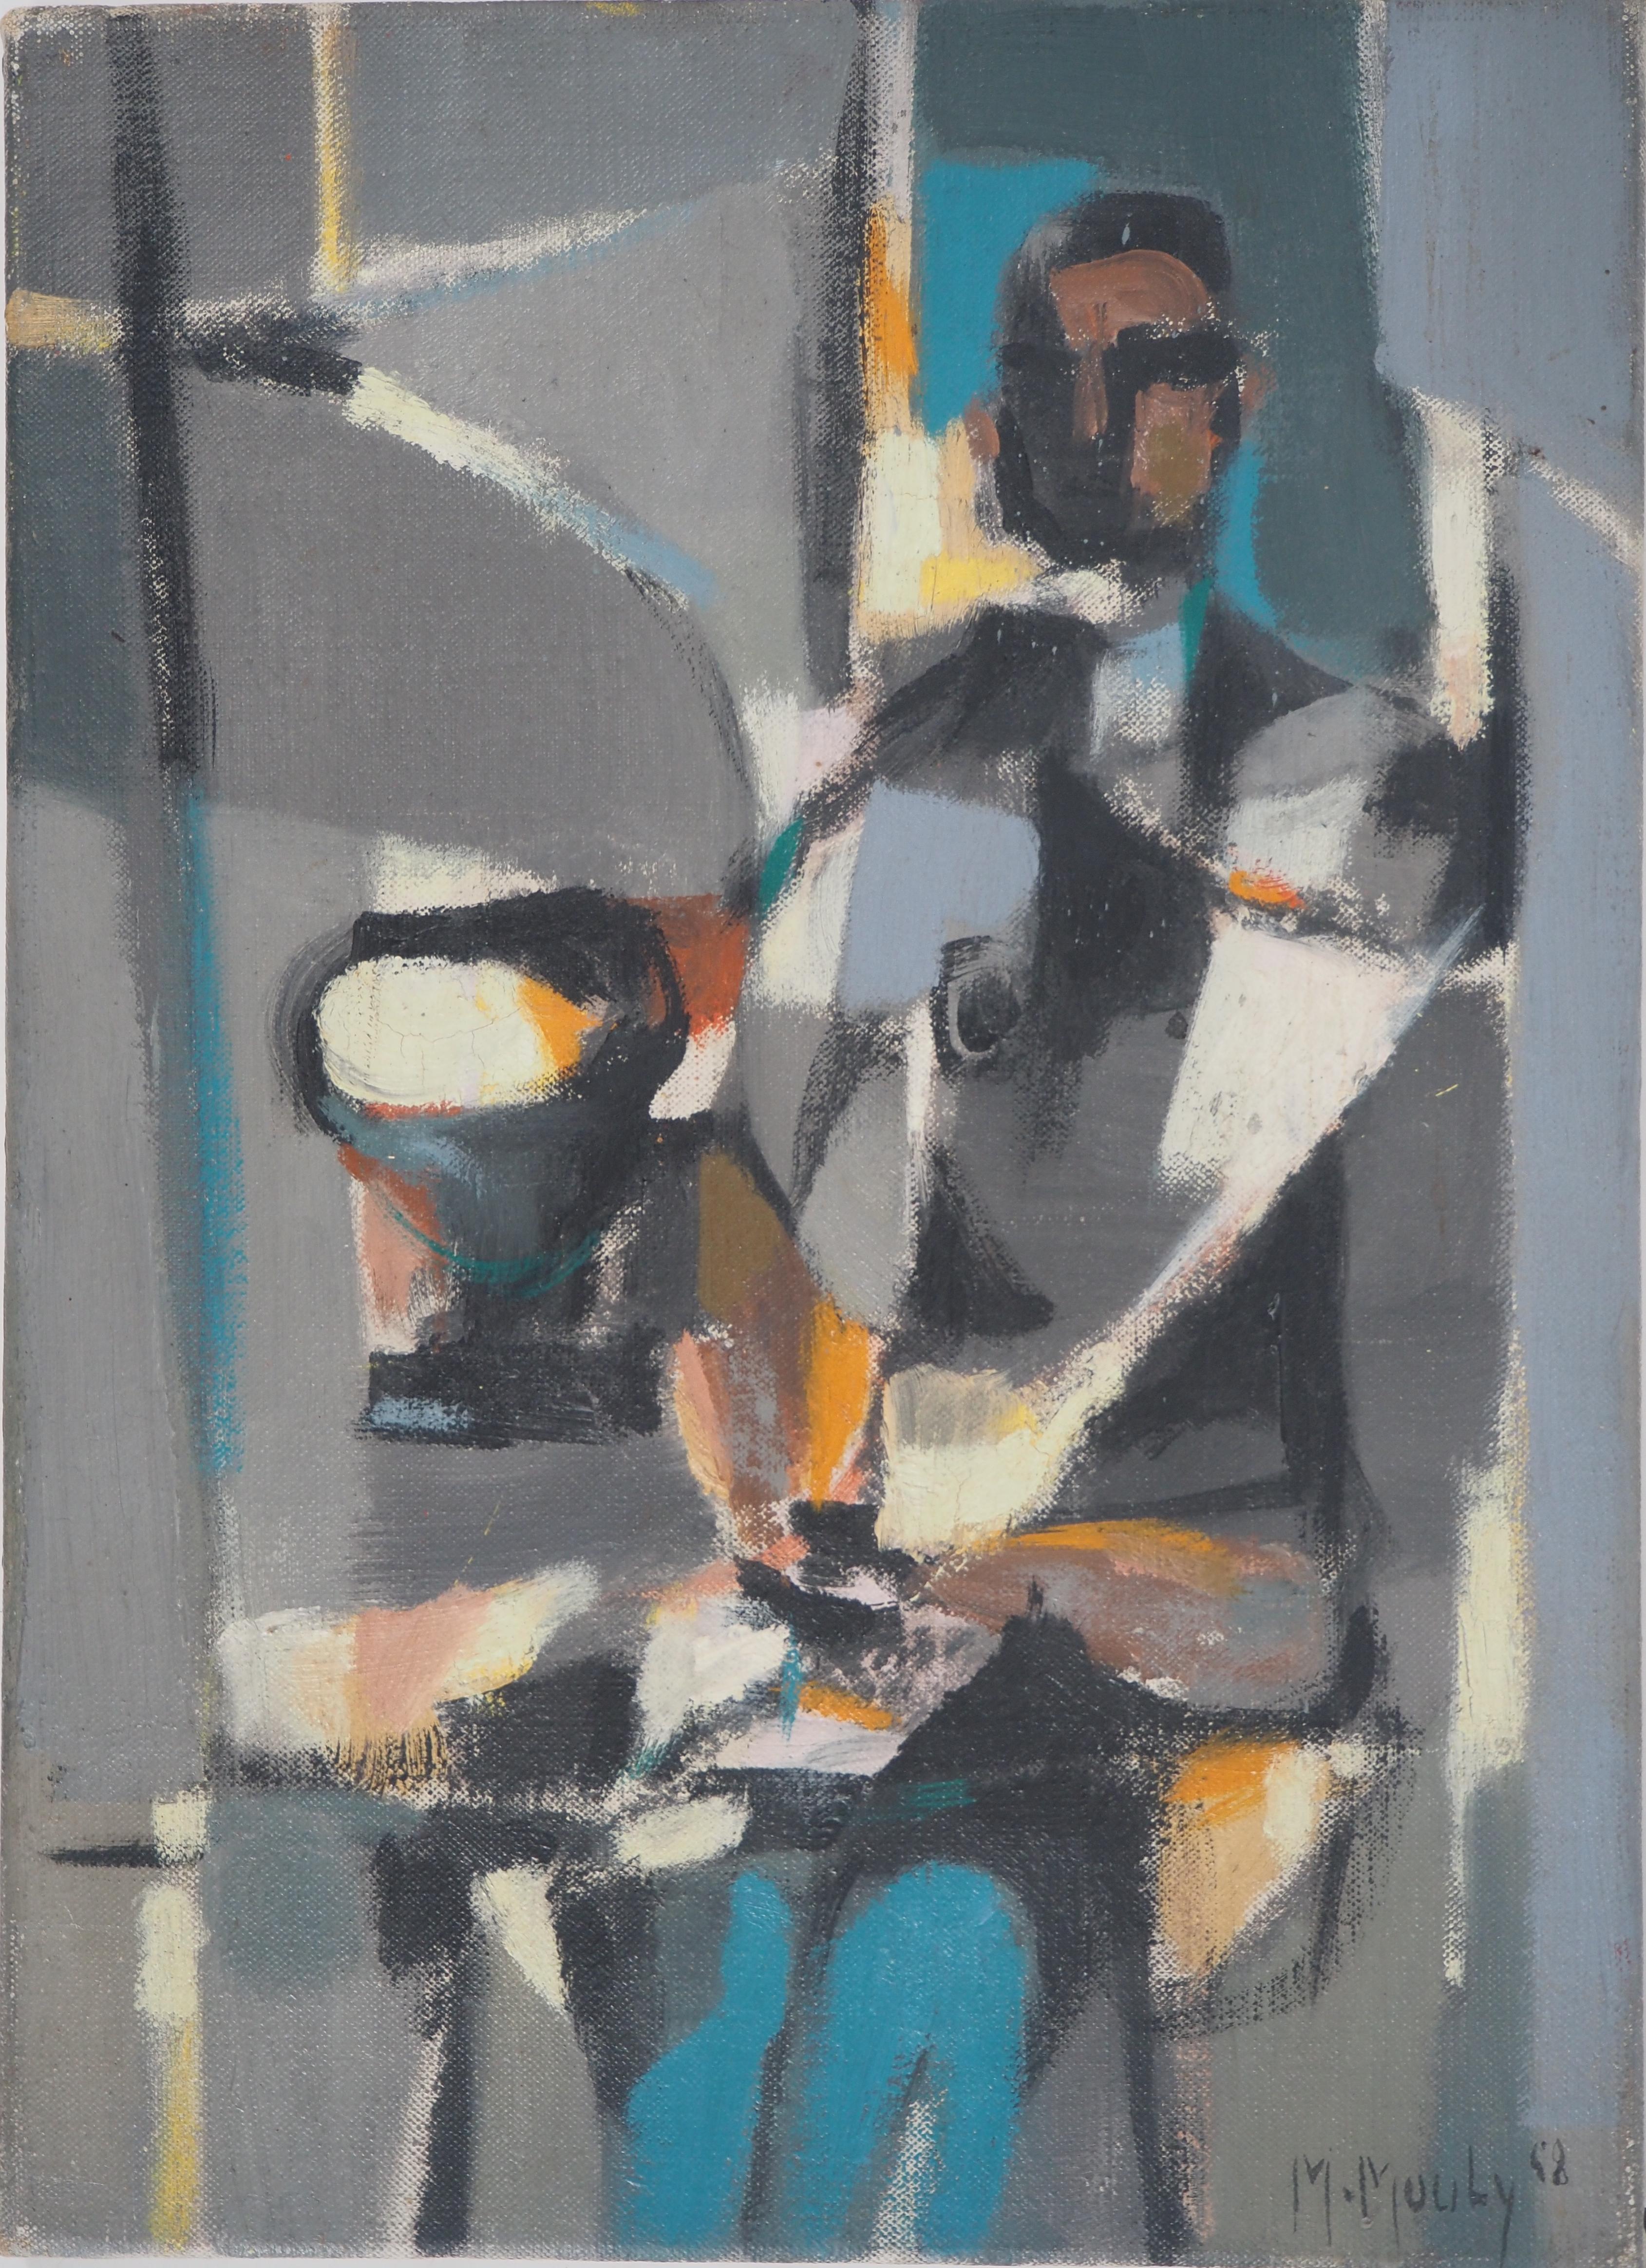 Marcel Mouly Portrait Painting - Man Reading a Newspaper on the Cafe Terrace - Original Oil on canvas, Signed